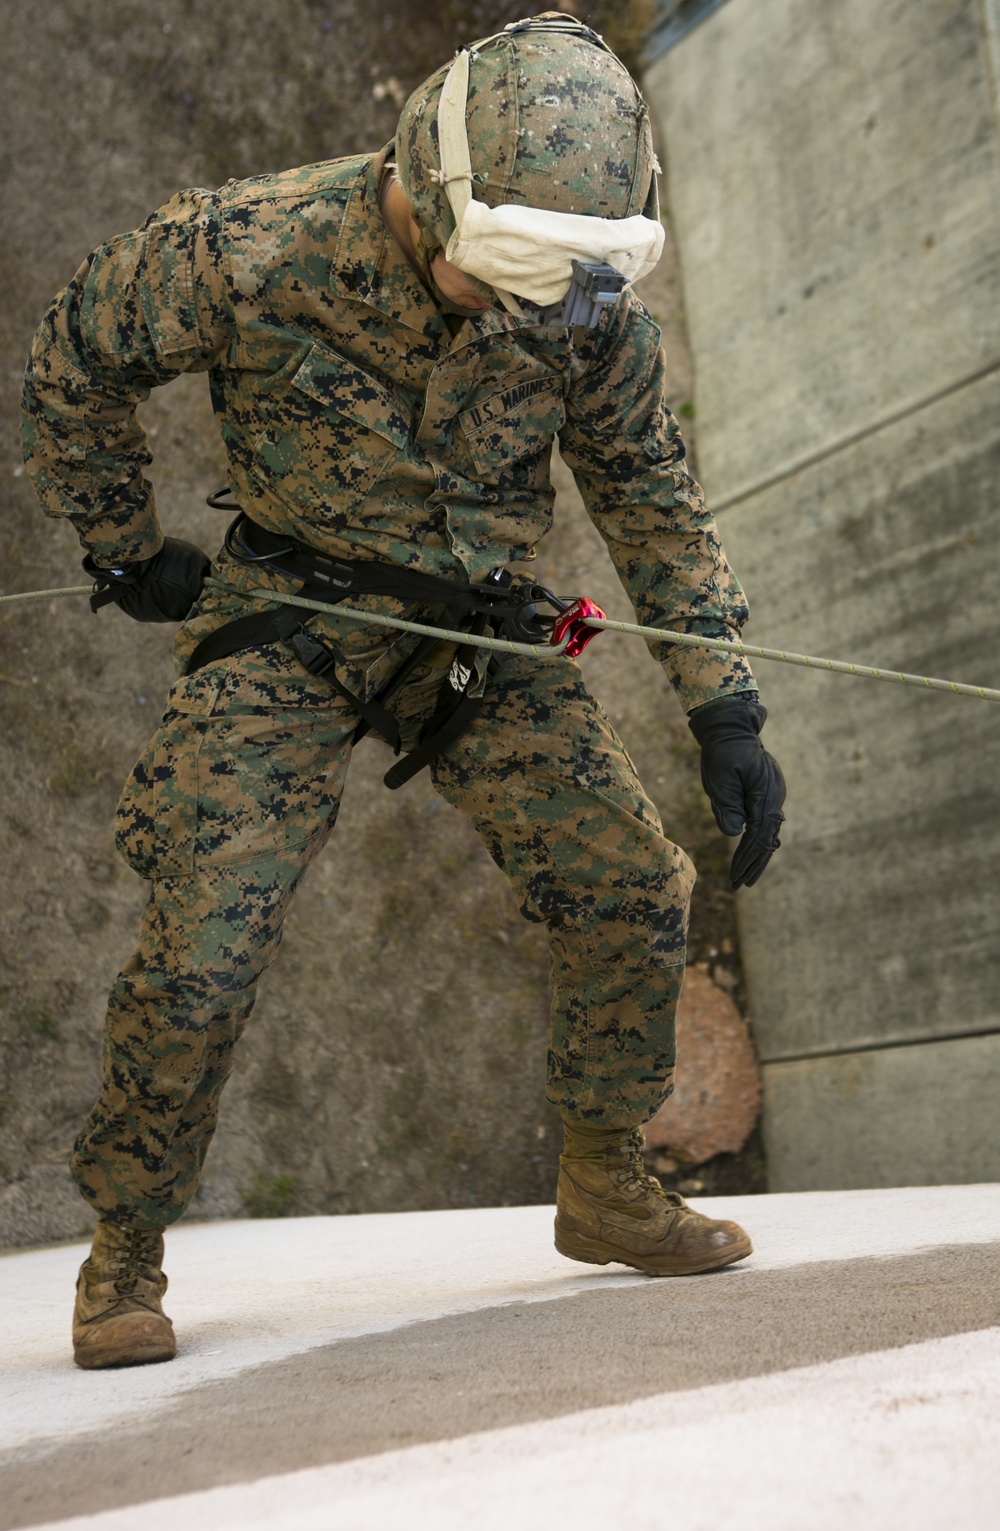 DVIDS - Images - Down and Out: MAGTF Marines rappel with Special